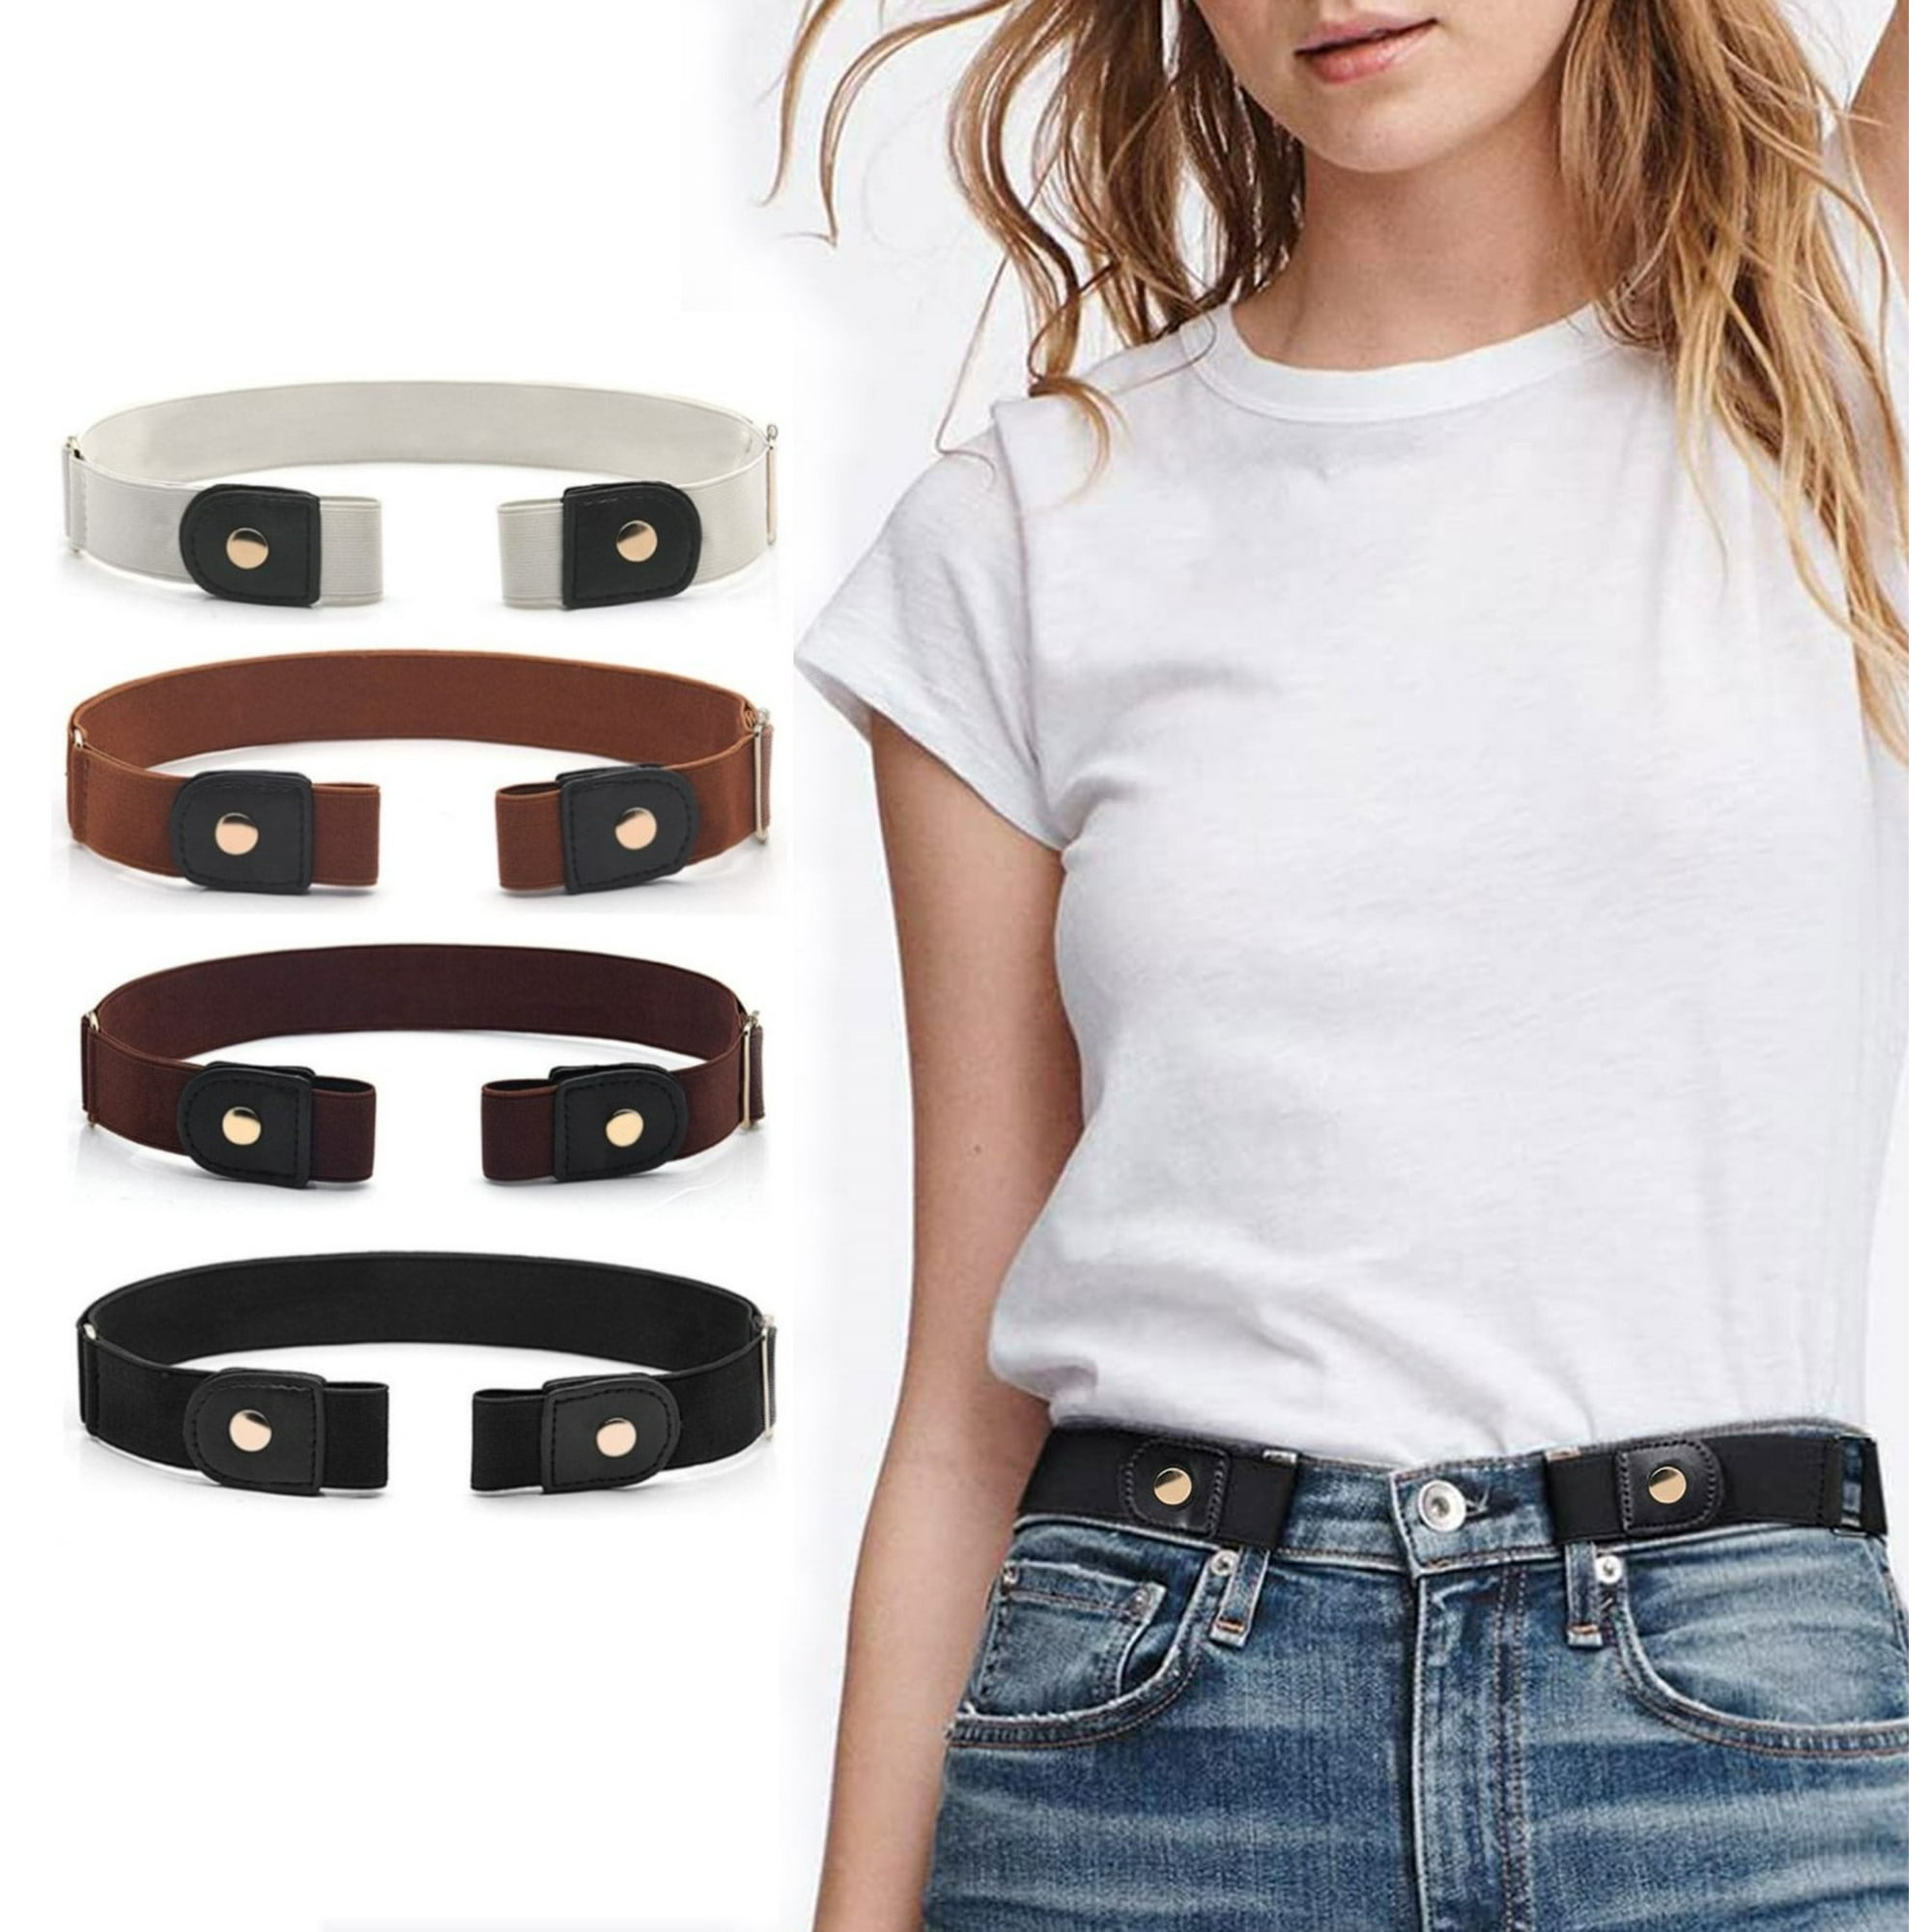 Buy Buckle Free Comfortable Elastic Belt for Women or Men, Buckle-less No  Bulge No Hassle Invisible Belts by WHIPPY at